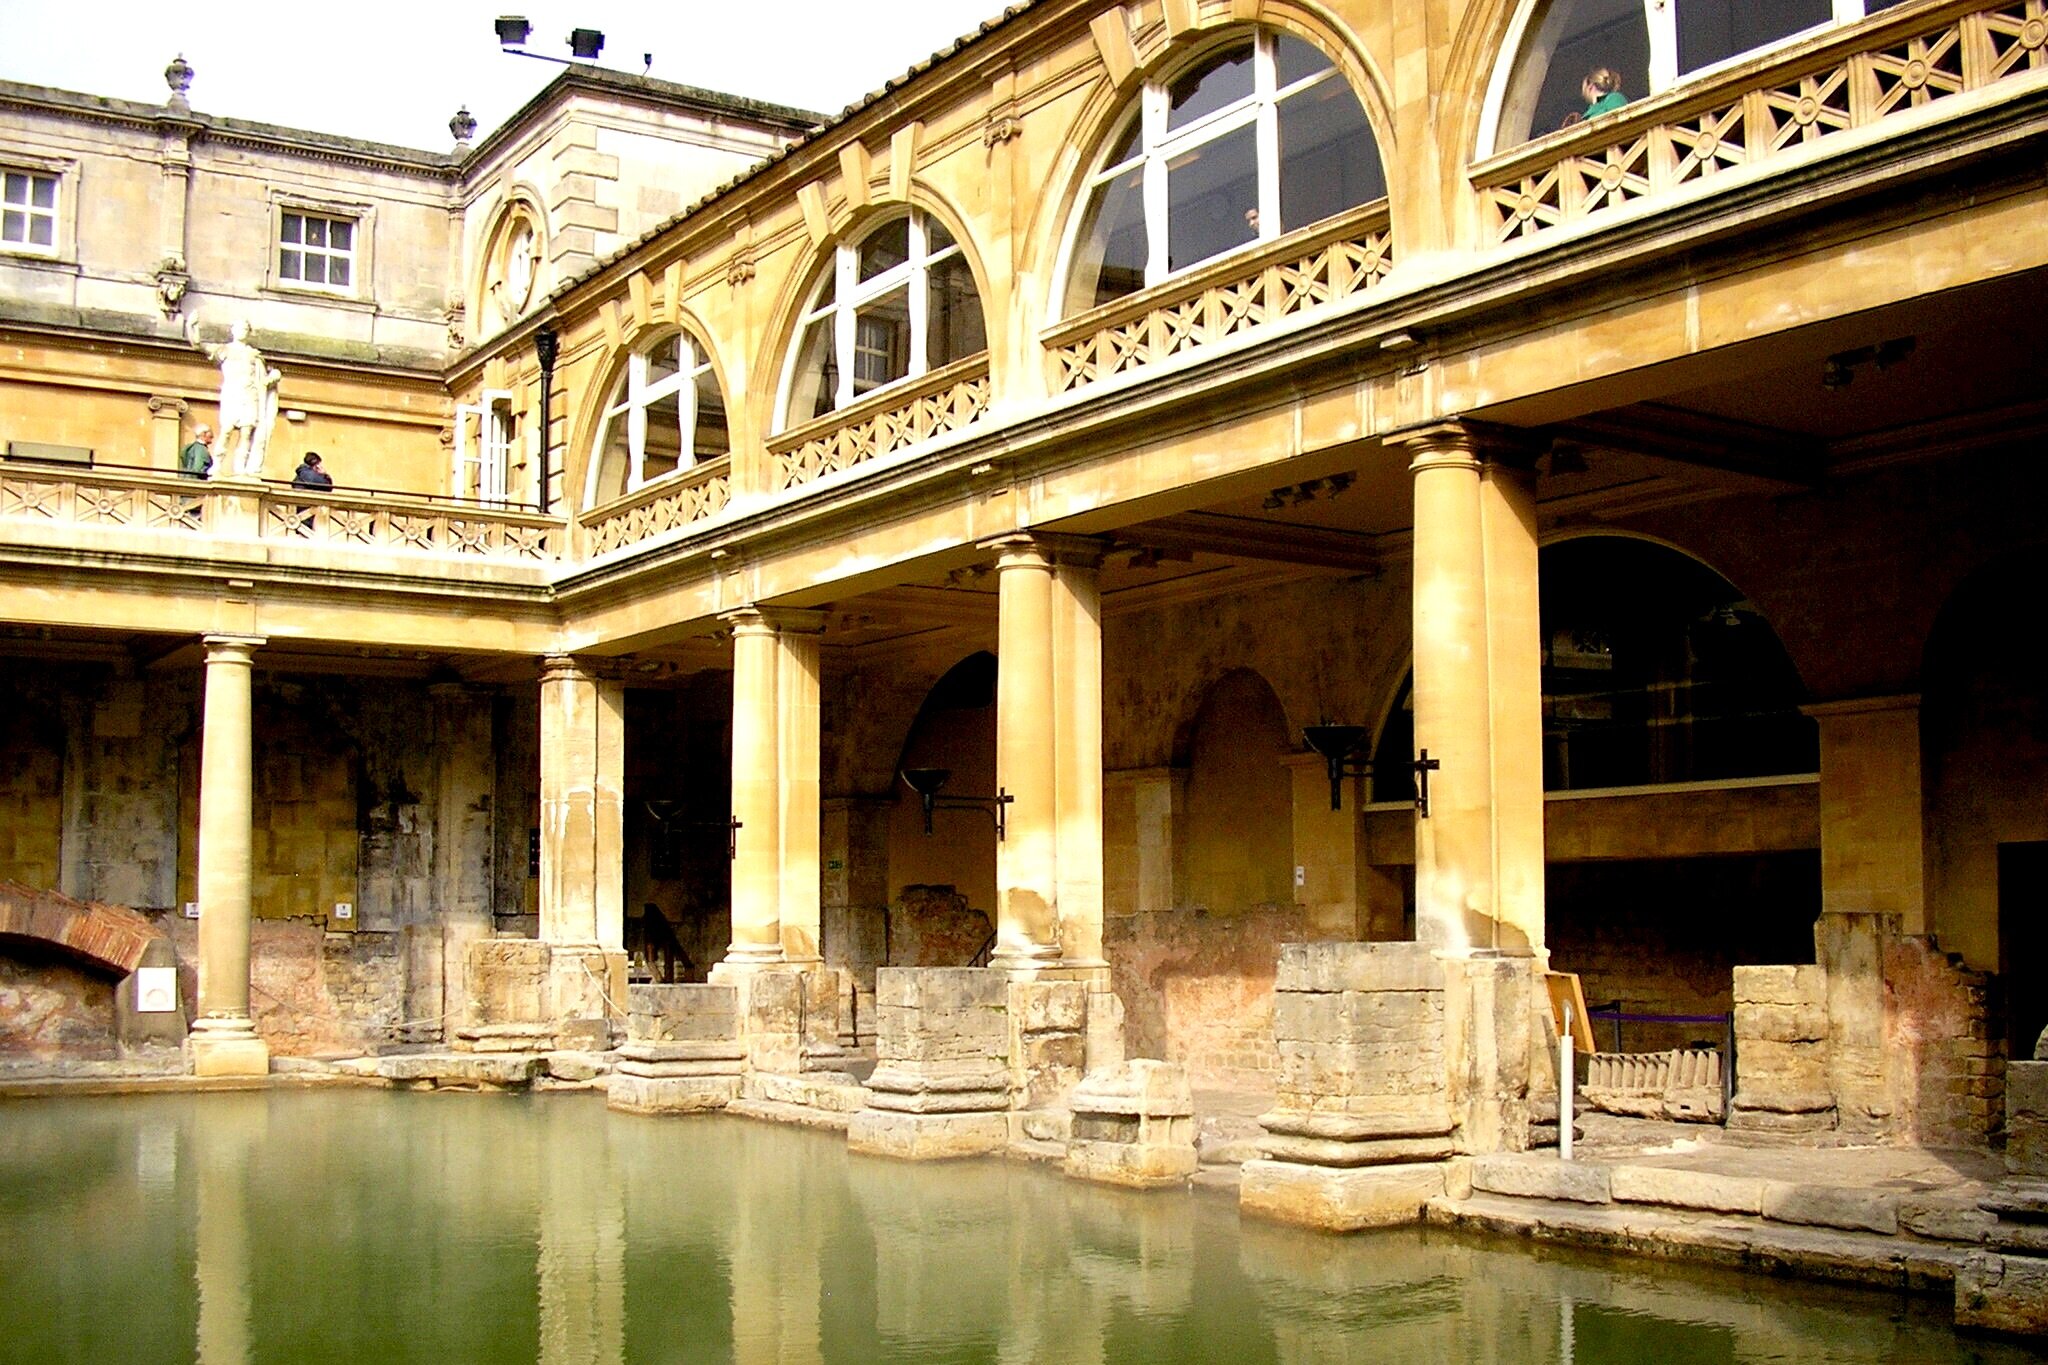   Beautifully preserved, the historic Roman spa town of Bath  